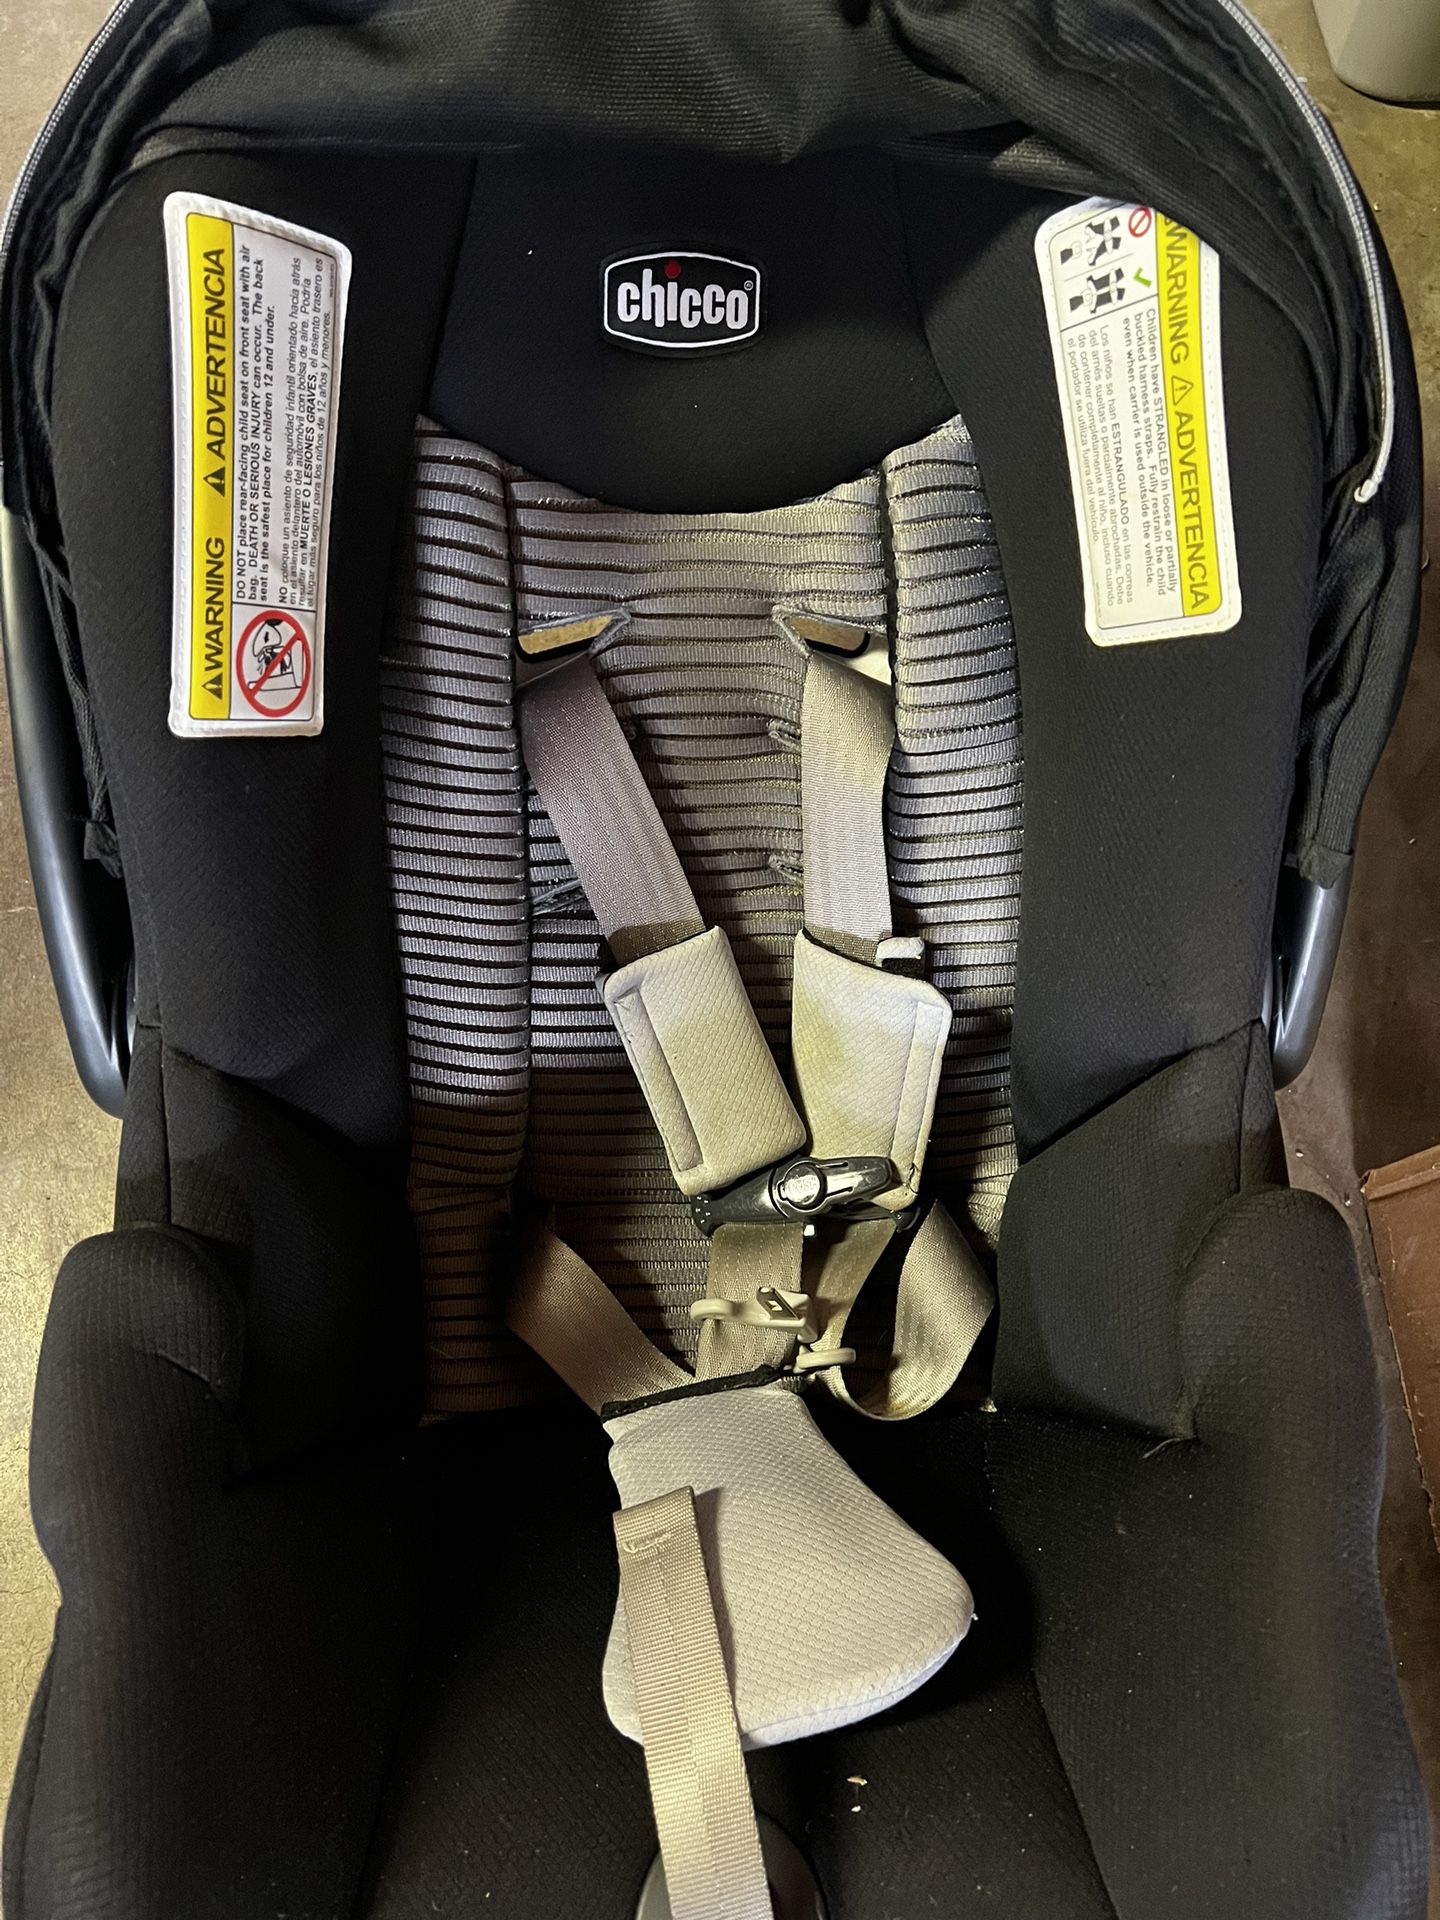 Chicco KeyFit30 Infant Car Seat And Base